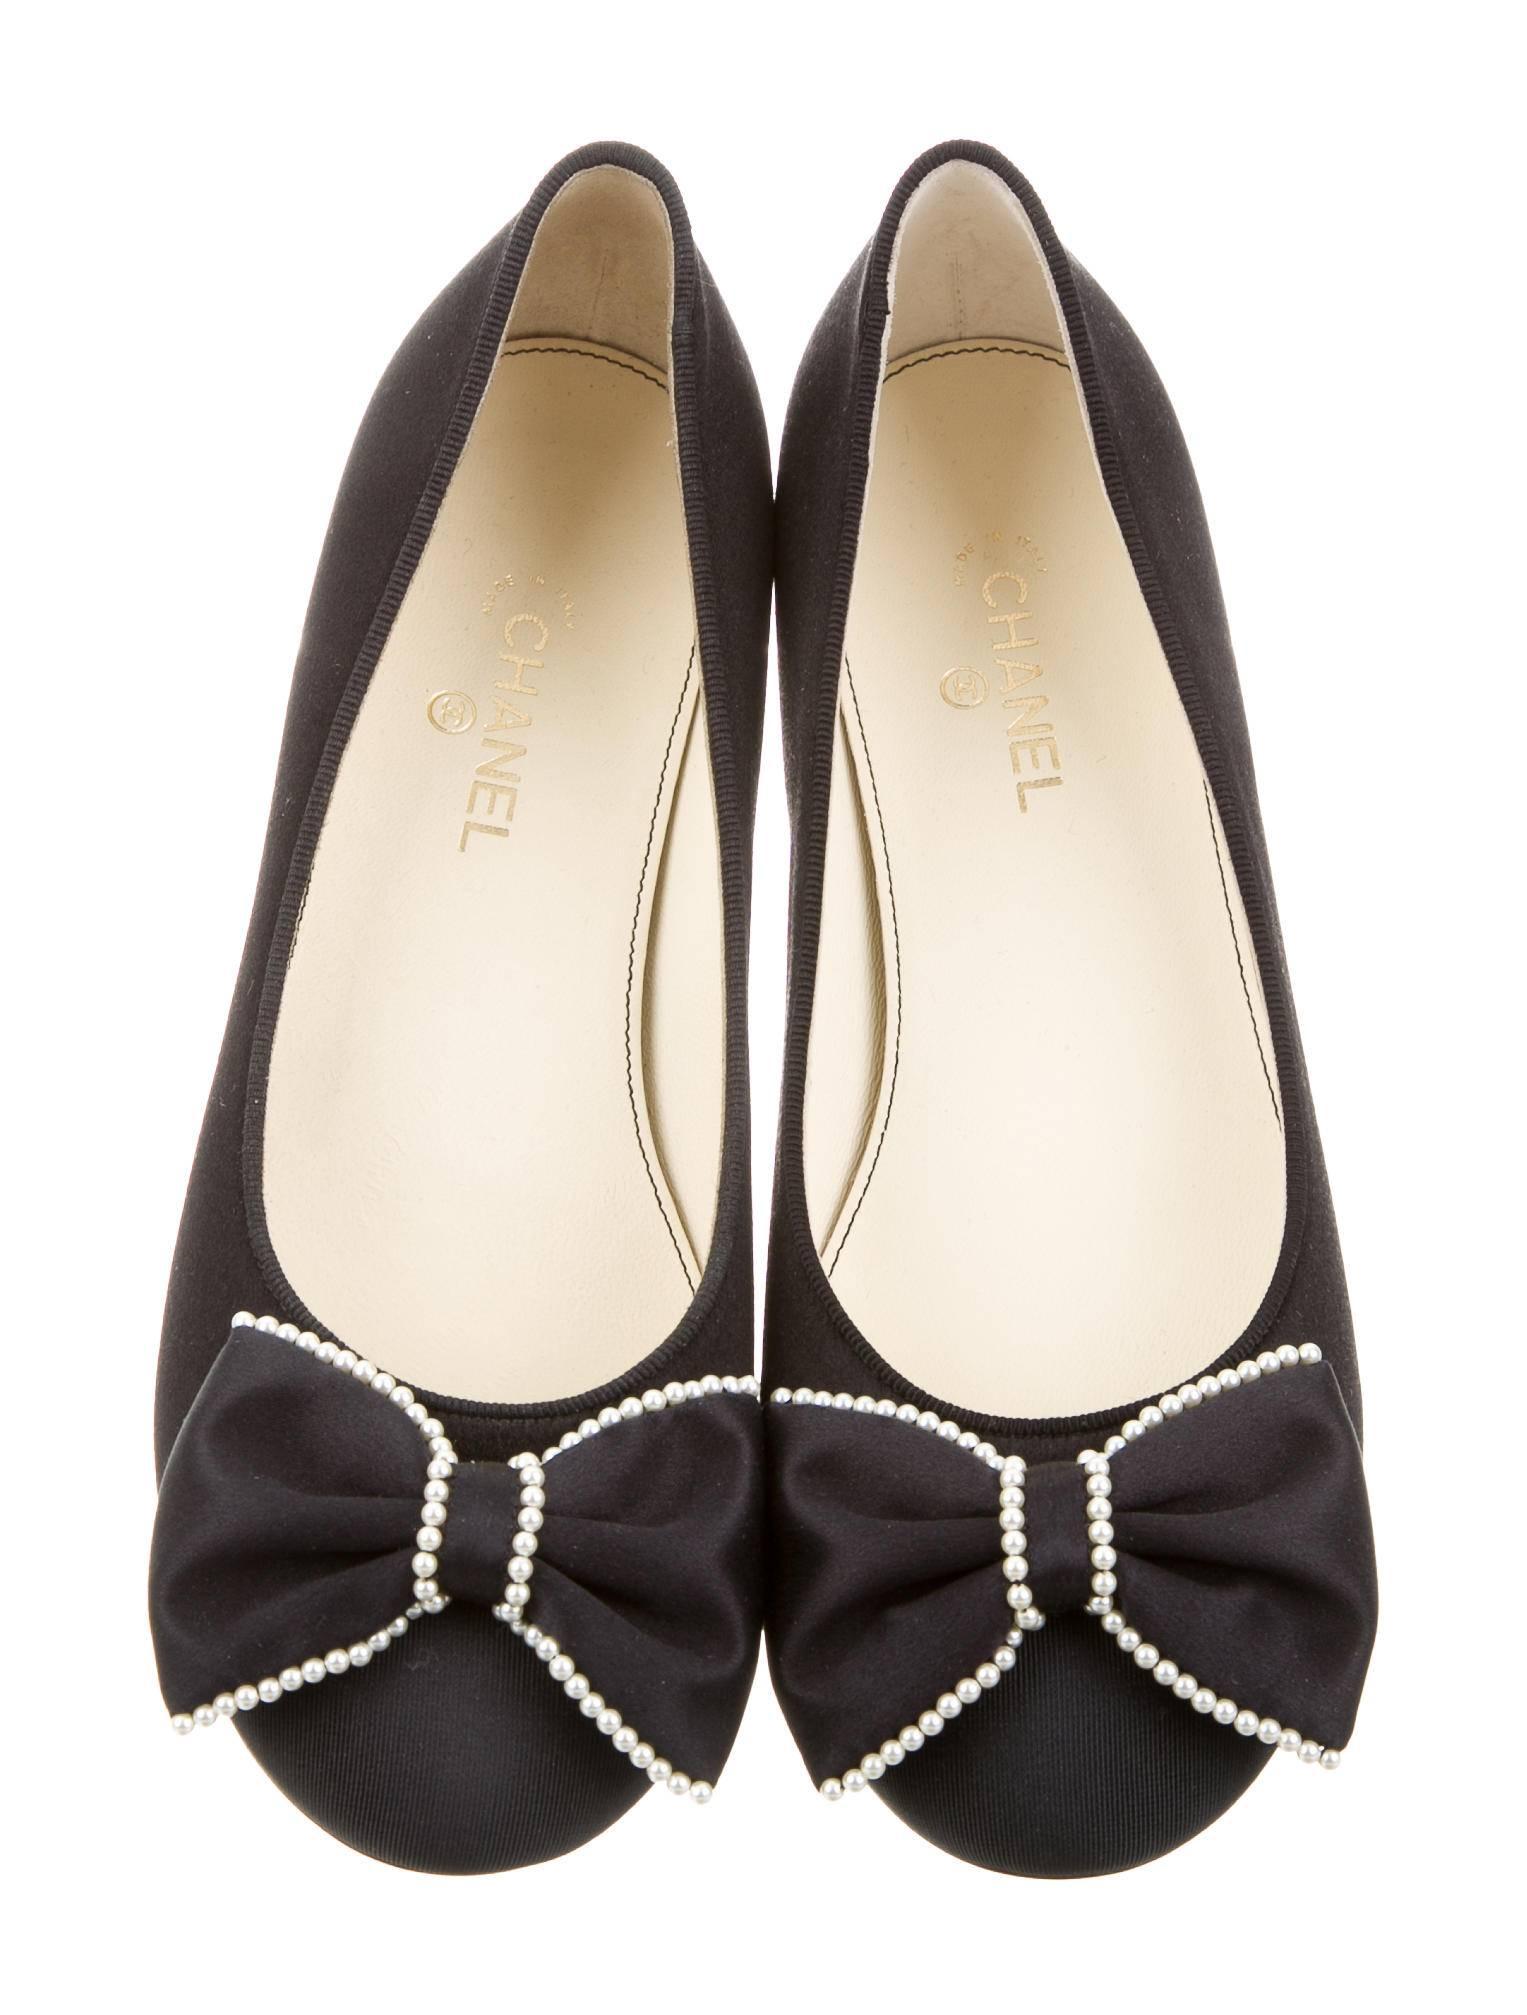 CURATOR'S NOTES

Chanel NEW & SOLD OUT Black Pearl Gold Bow Shoes Flats in Box 

Size IT 36
Satin
Faux pearl
Gold tone trim
Made in Italy
Heel height 0.25"
Includes original Chanel box

Shop Newfound Luxury for authentic new Chanel flaps